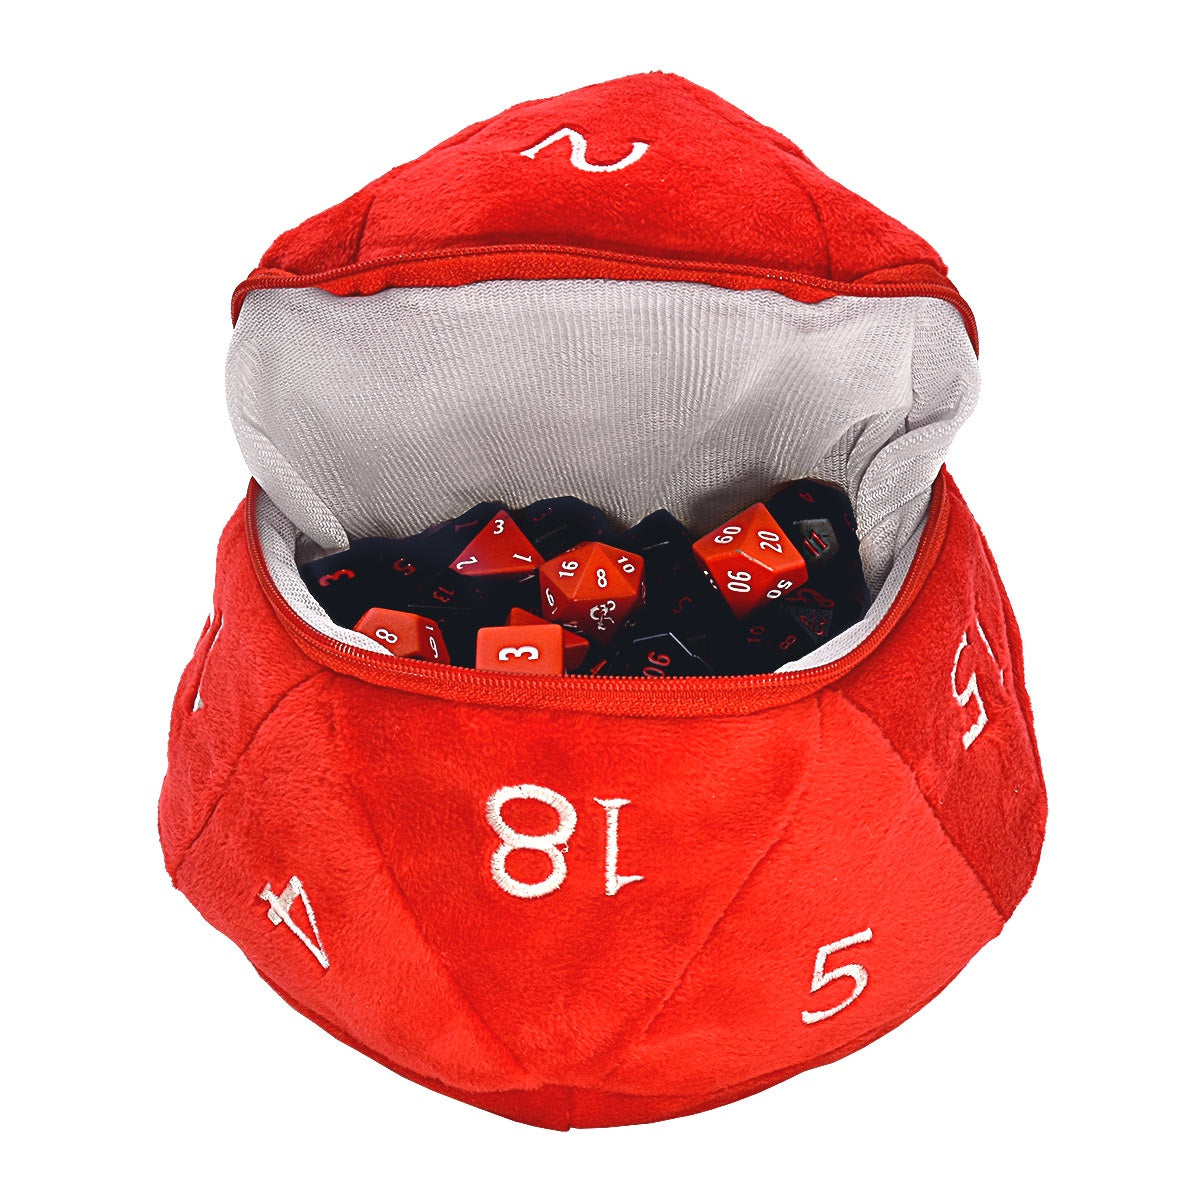 Dungeons &amp; Dragons D20 Plush Red and White Dice Bag